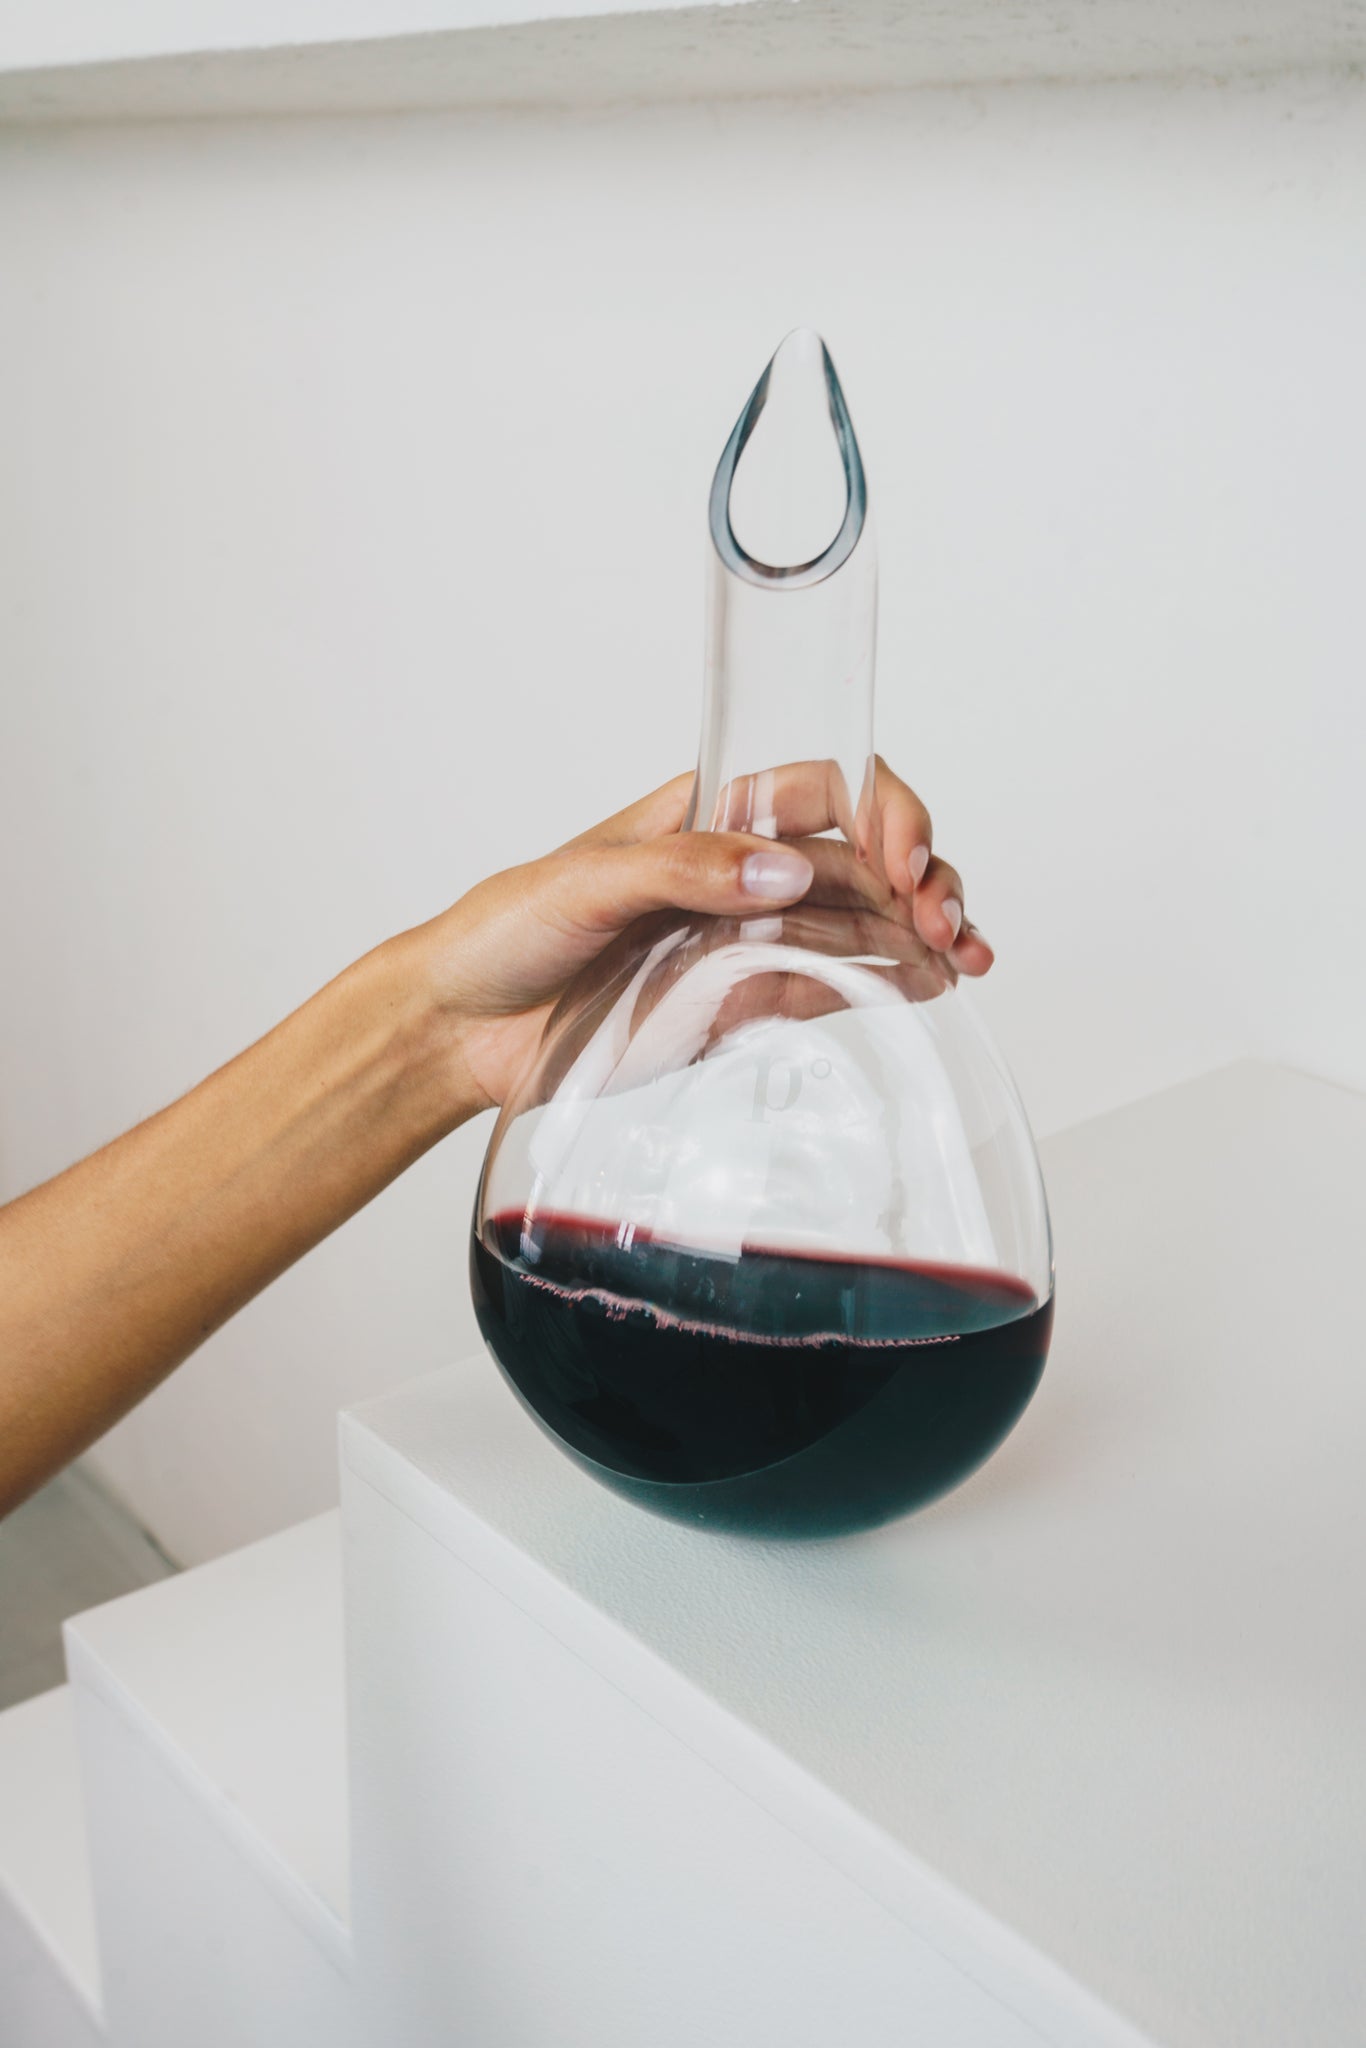 How to Effortlessly Clean a Decanter